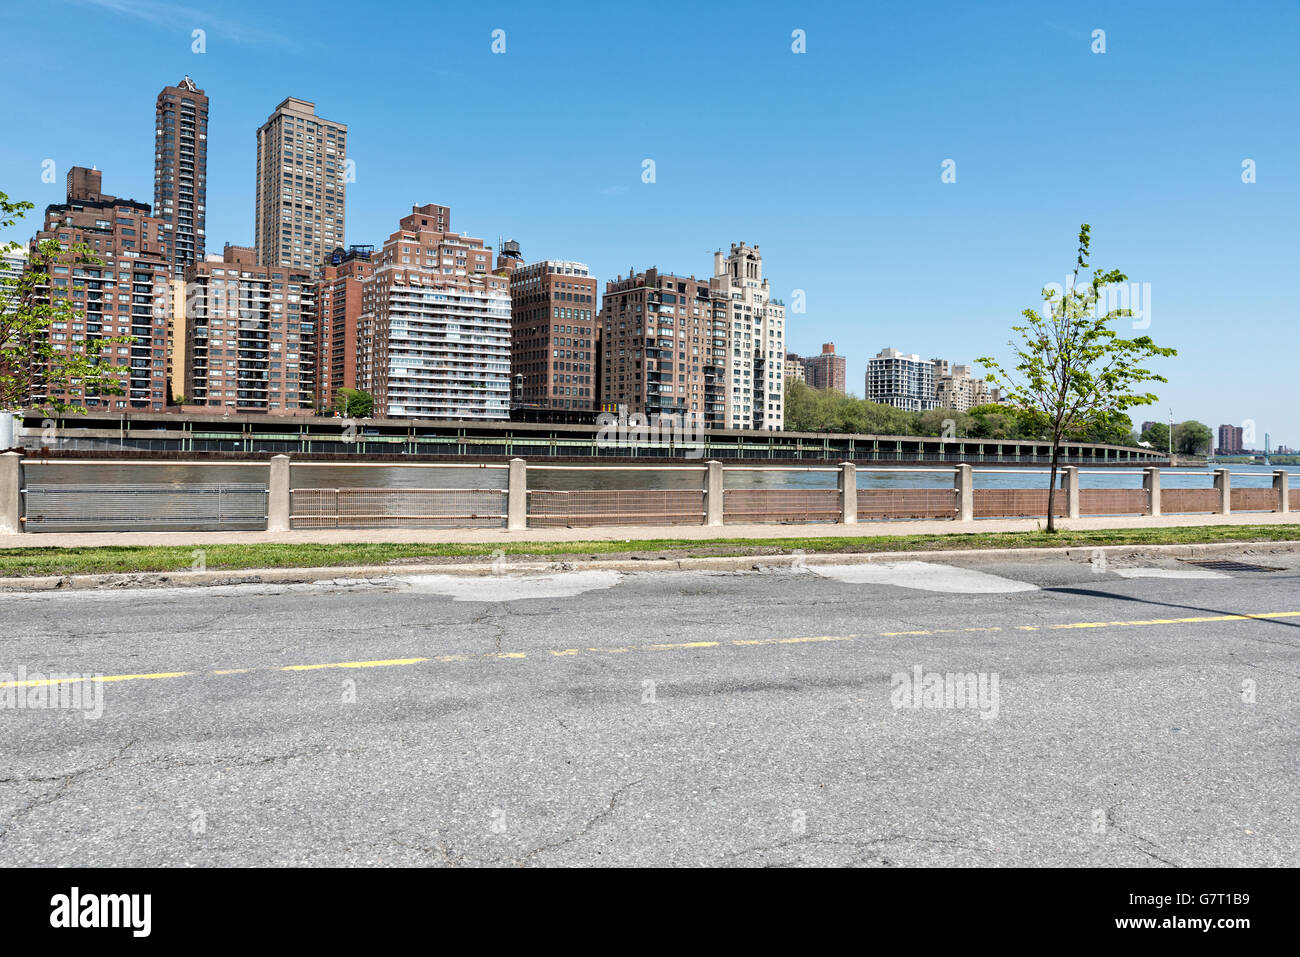 Looking at the Upper East Side of Manhattan Skyline from Roosevelt Island, Nww York City, USA. Stock Photo